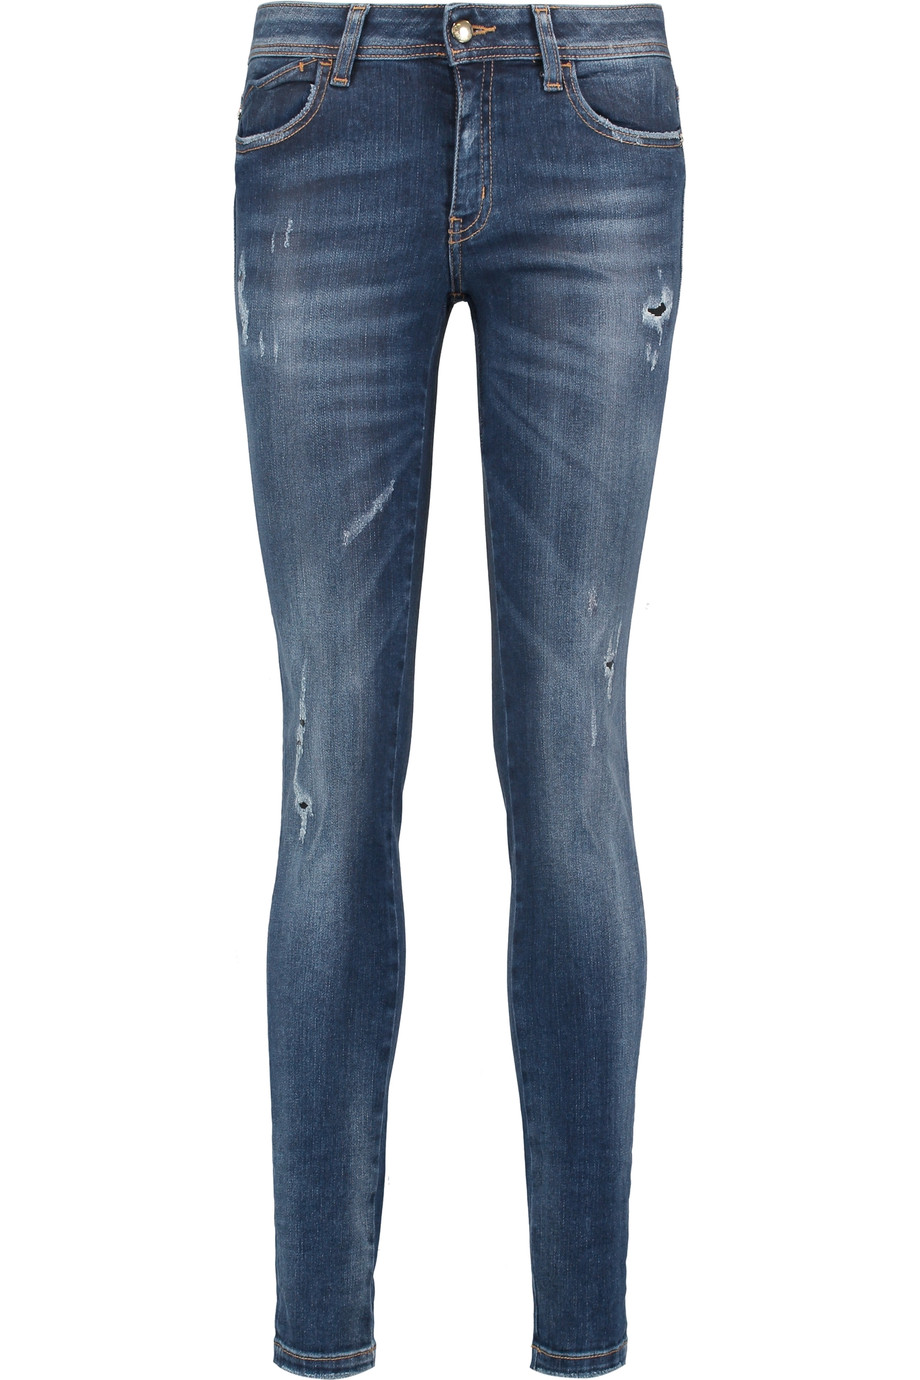 Just Cavalli Mid-rise Embroidered Distressed Skinny Jeans | ModeSens